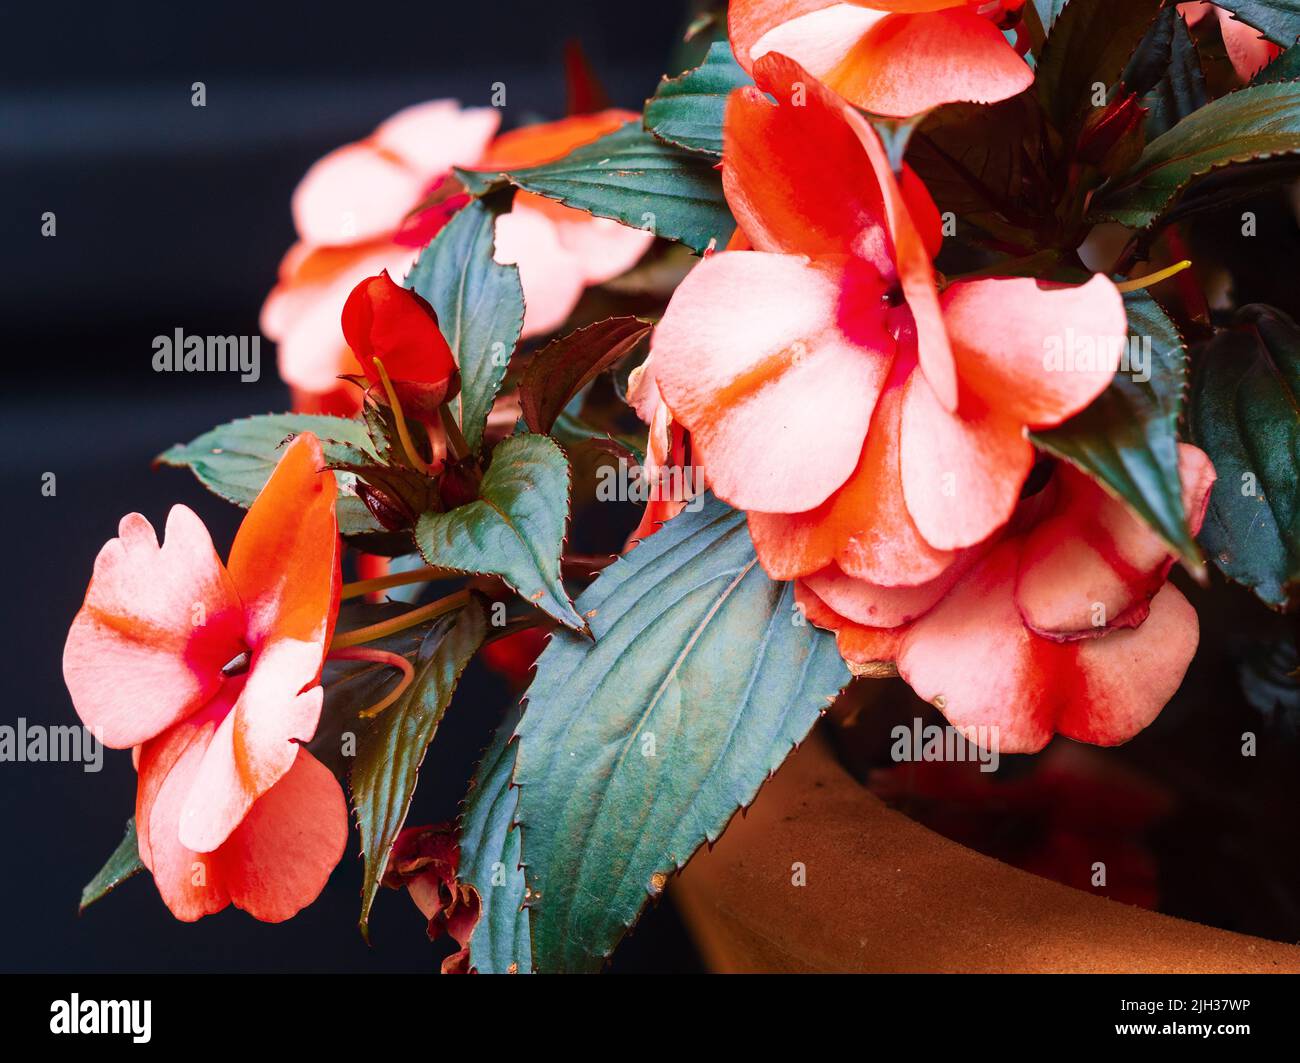 Pale pink and red flowers of the tender New Guinea Impatiens, Impatiens hawkerii 'Paradise Strawberry Bicolor' grown for summer outside display Stock Photo